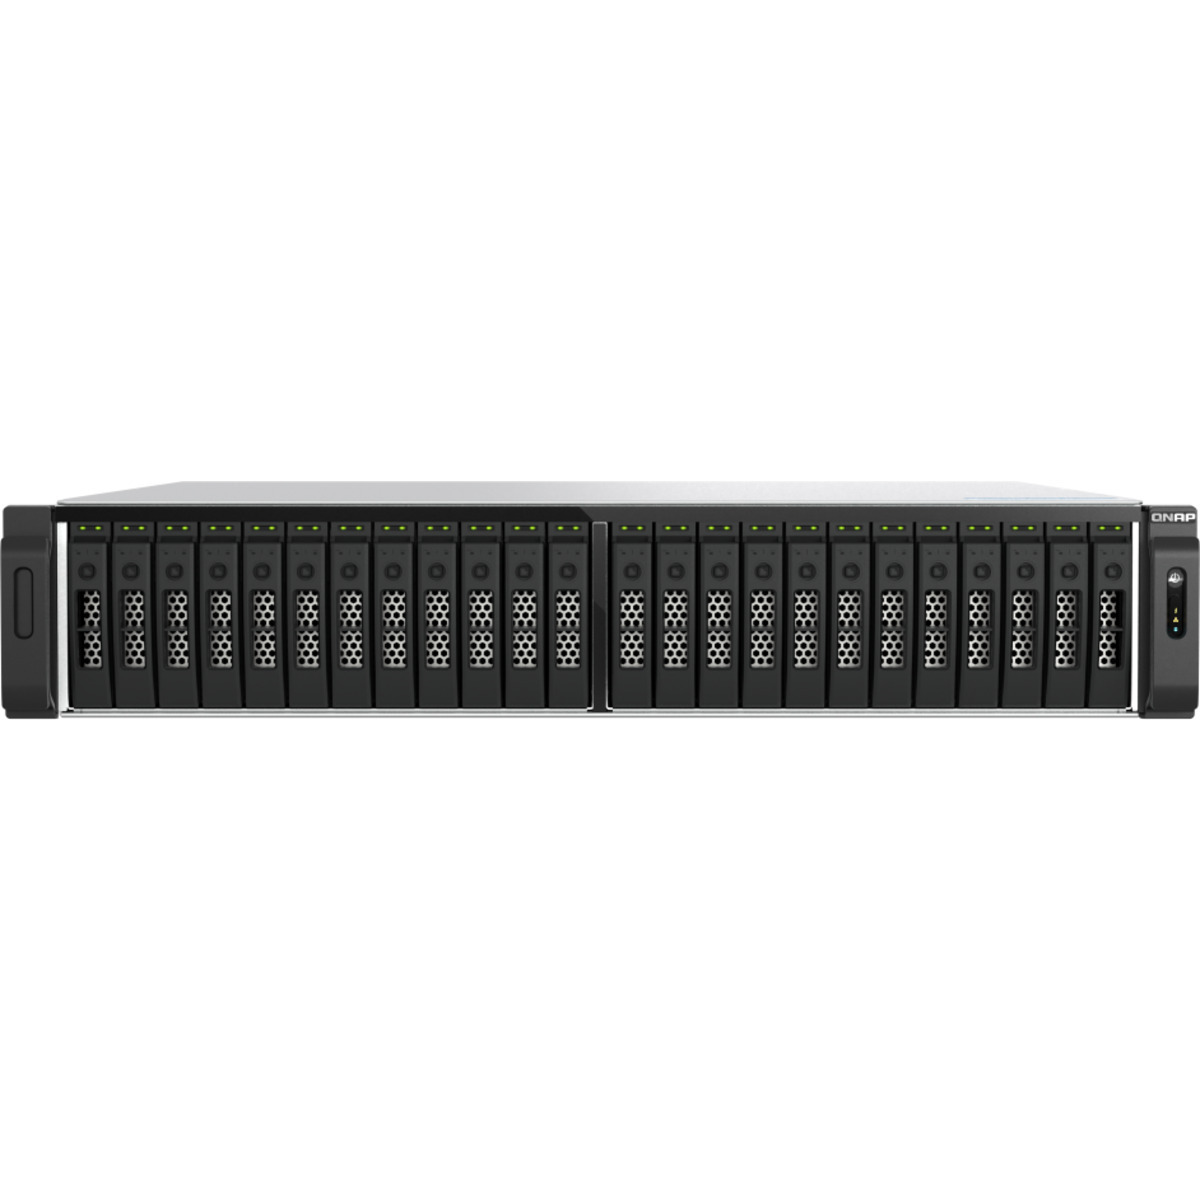 QNAP TS-h3077AFU Ryzen 5 All-Flash ZFS 108tb 30-Bay RackMount Large Business / Enterprise NAS - Network Attached Storage Device 27x4tb Samsung 870 QVO MZ-77Q4T0 2.5 560/530MB/s SATA 6Gb/s SSD CONSUMER Class Drives Installed - Burn-In Tested TS-h3077AFU Ryzen 5 All-Flash ZFS